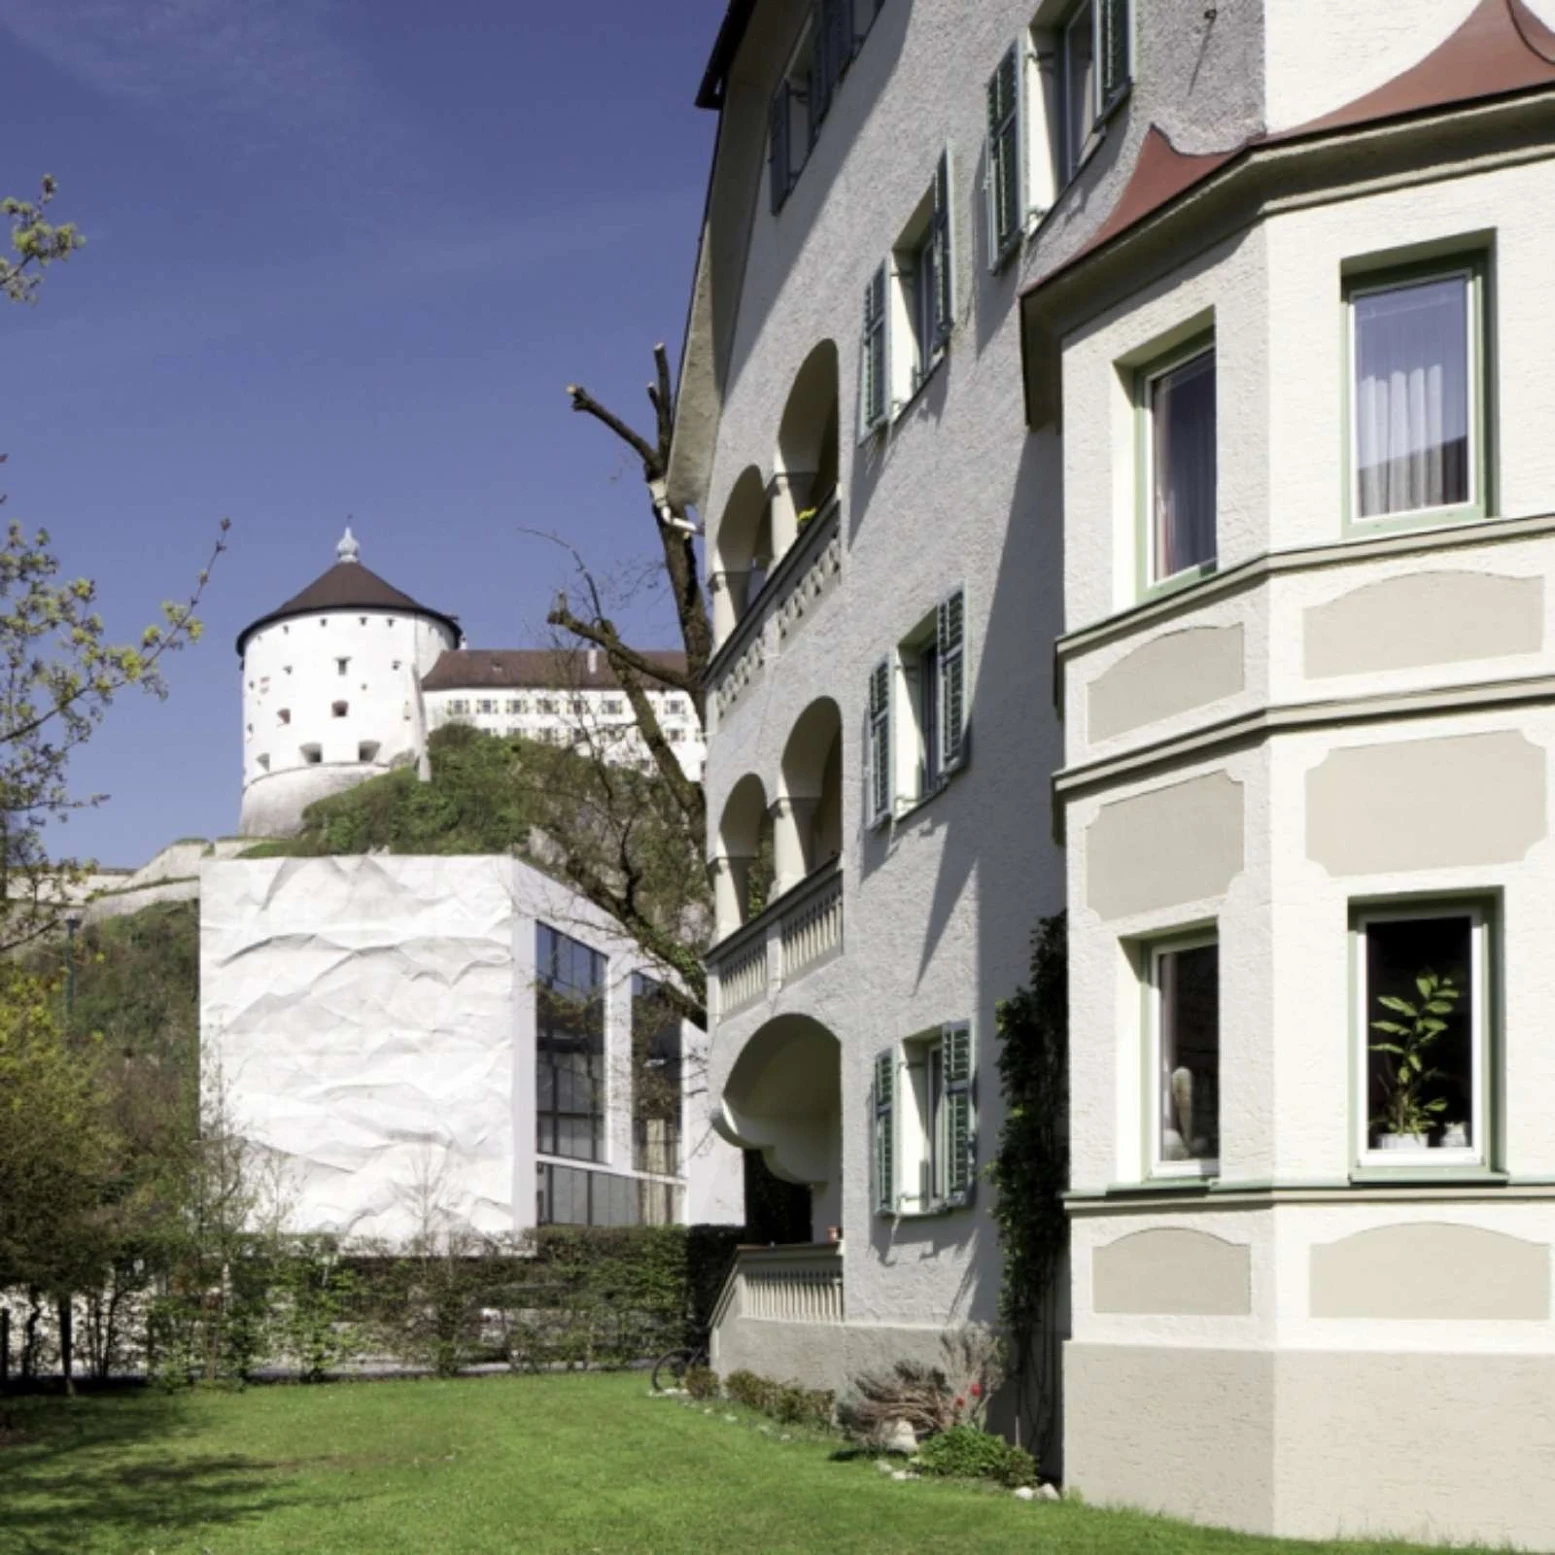 School Extension with Crinkled Wall by Johannes Wiesflecker